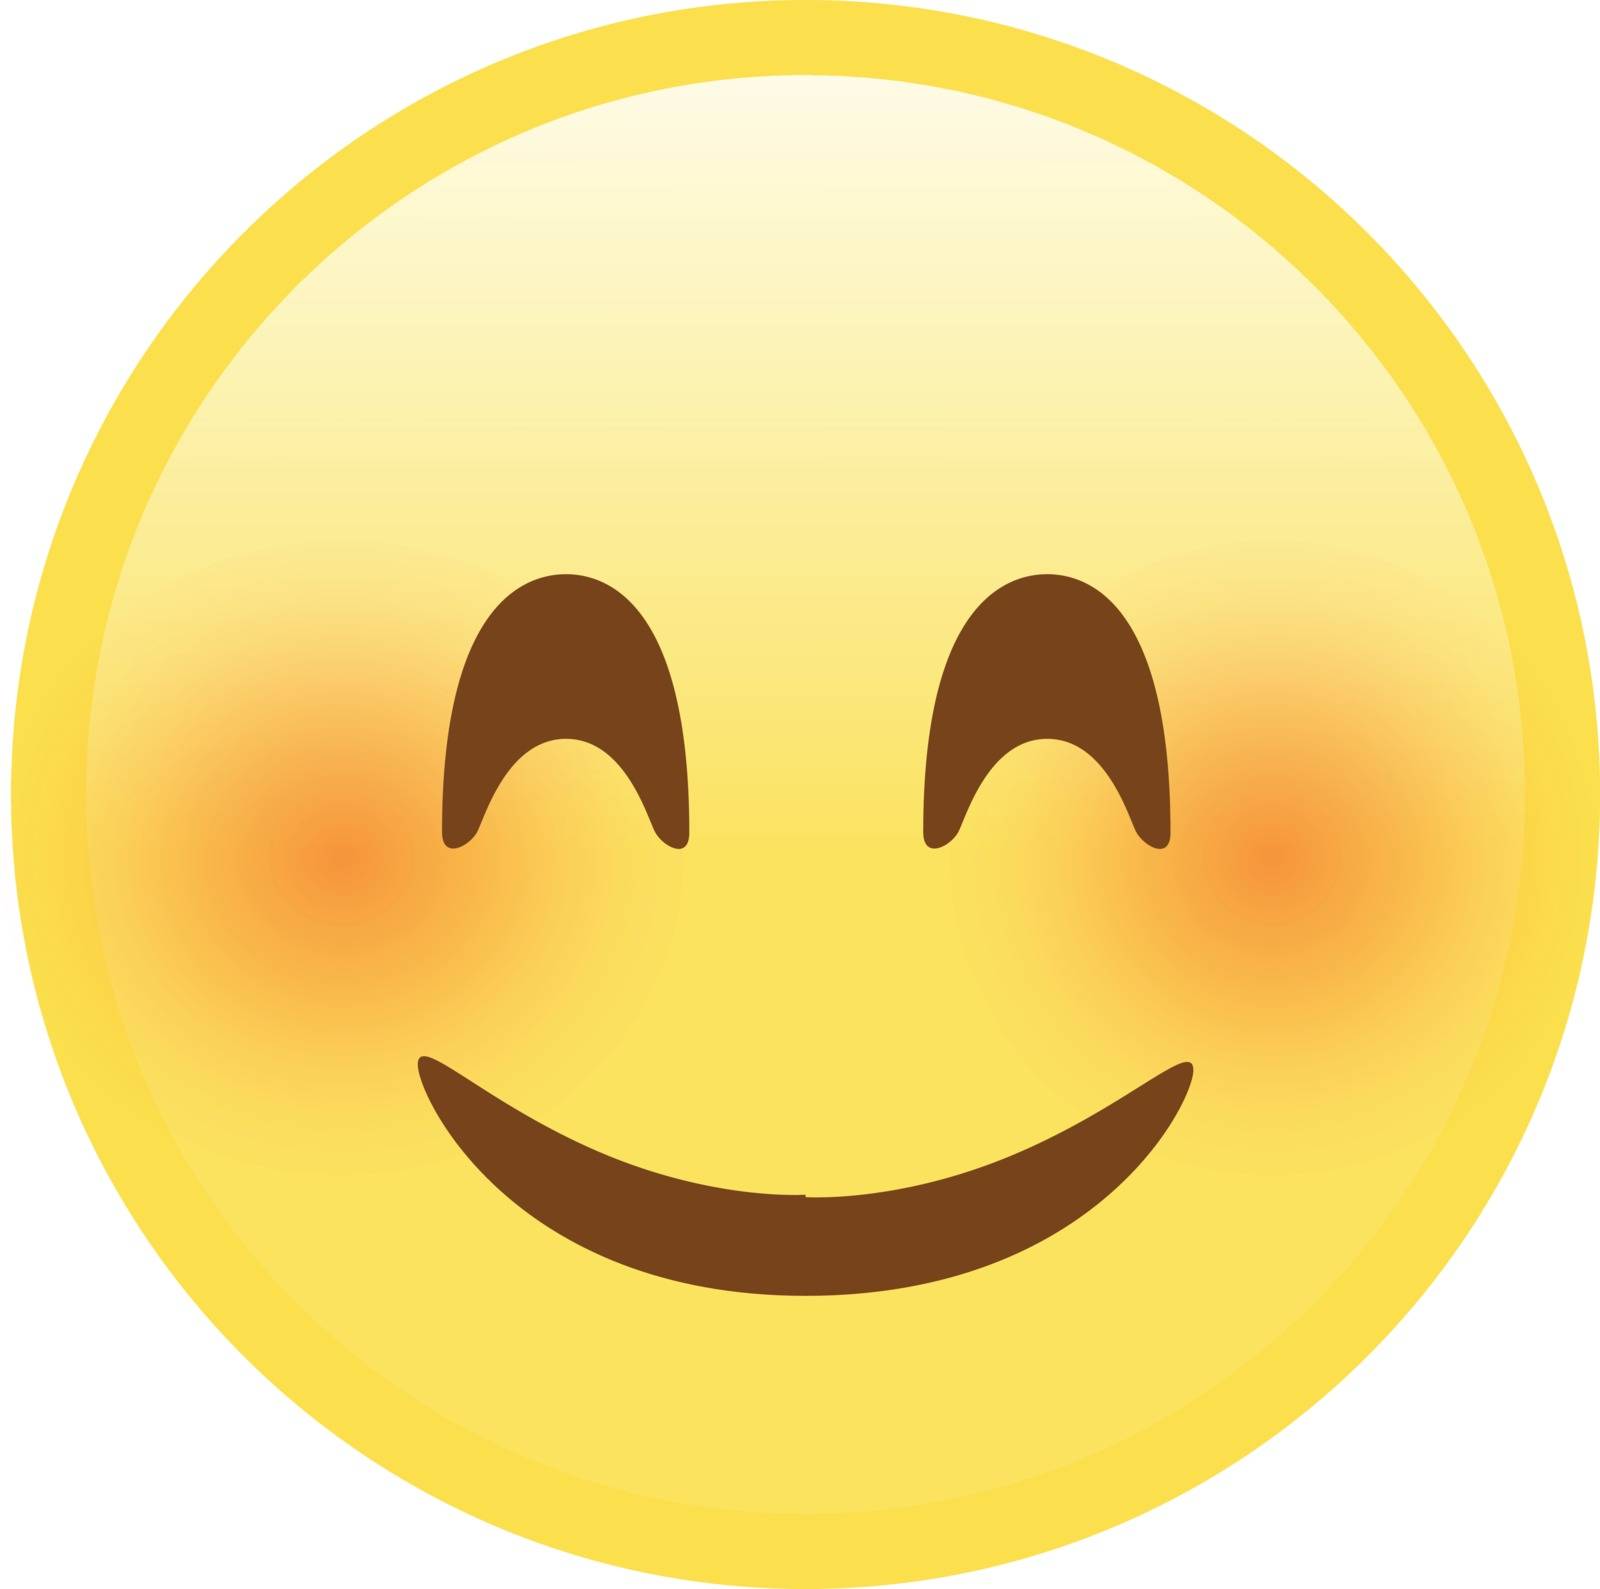 The isolated vector yellow happy smiley face icon with red cheek